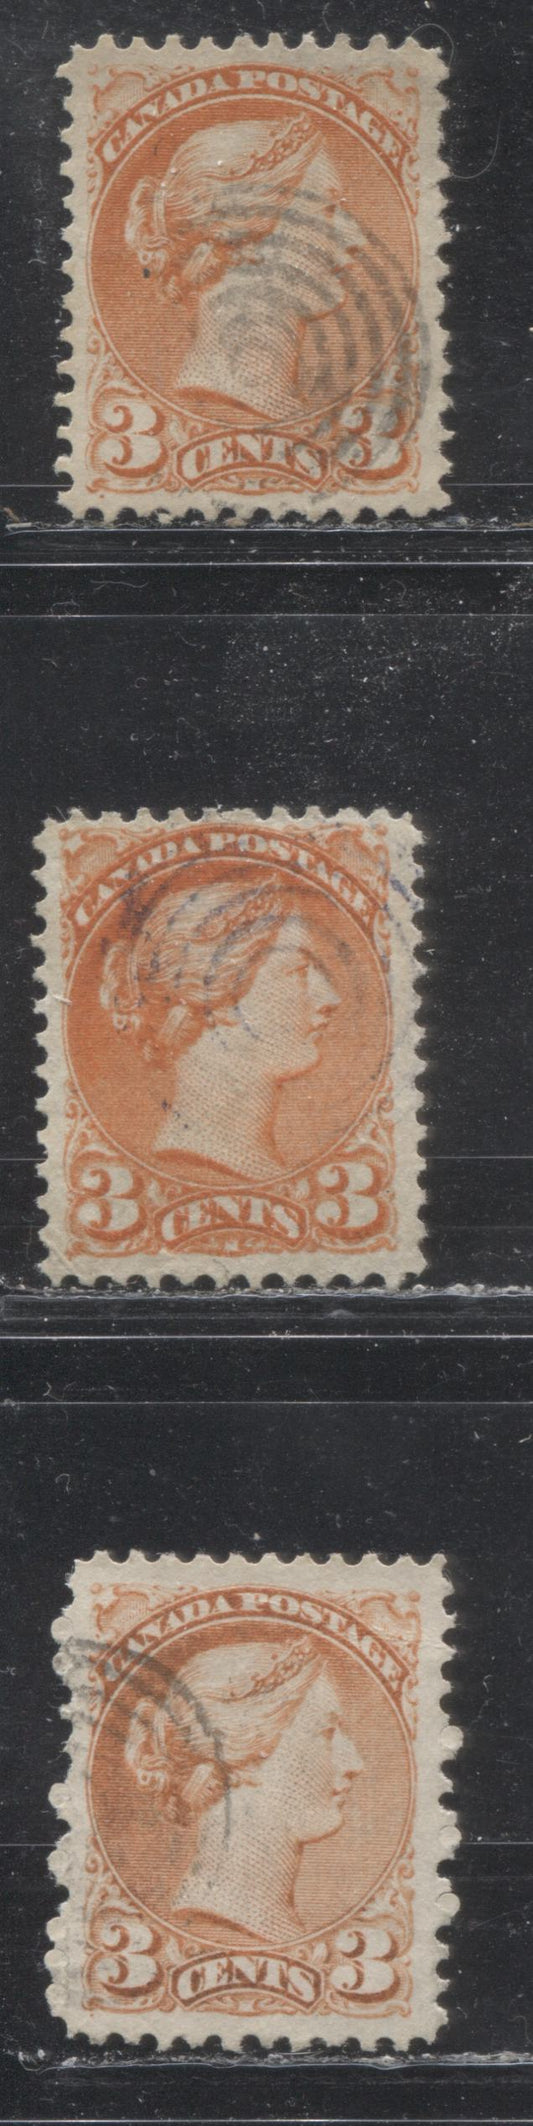 Lot 170 Canada #37iii 3c Orange Red Queen Victoria, 1870-1897 Small Queen Issue, Three Very Fine Used Singles On Various Vertical Wove Papers, Perfs 11.5 x 12.1, 11.75 x 12.1 & 11.7 x 12.15, Three Different Shades